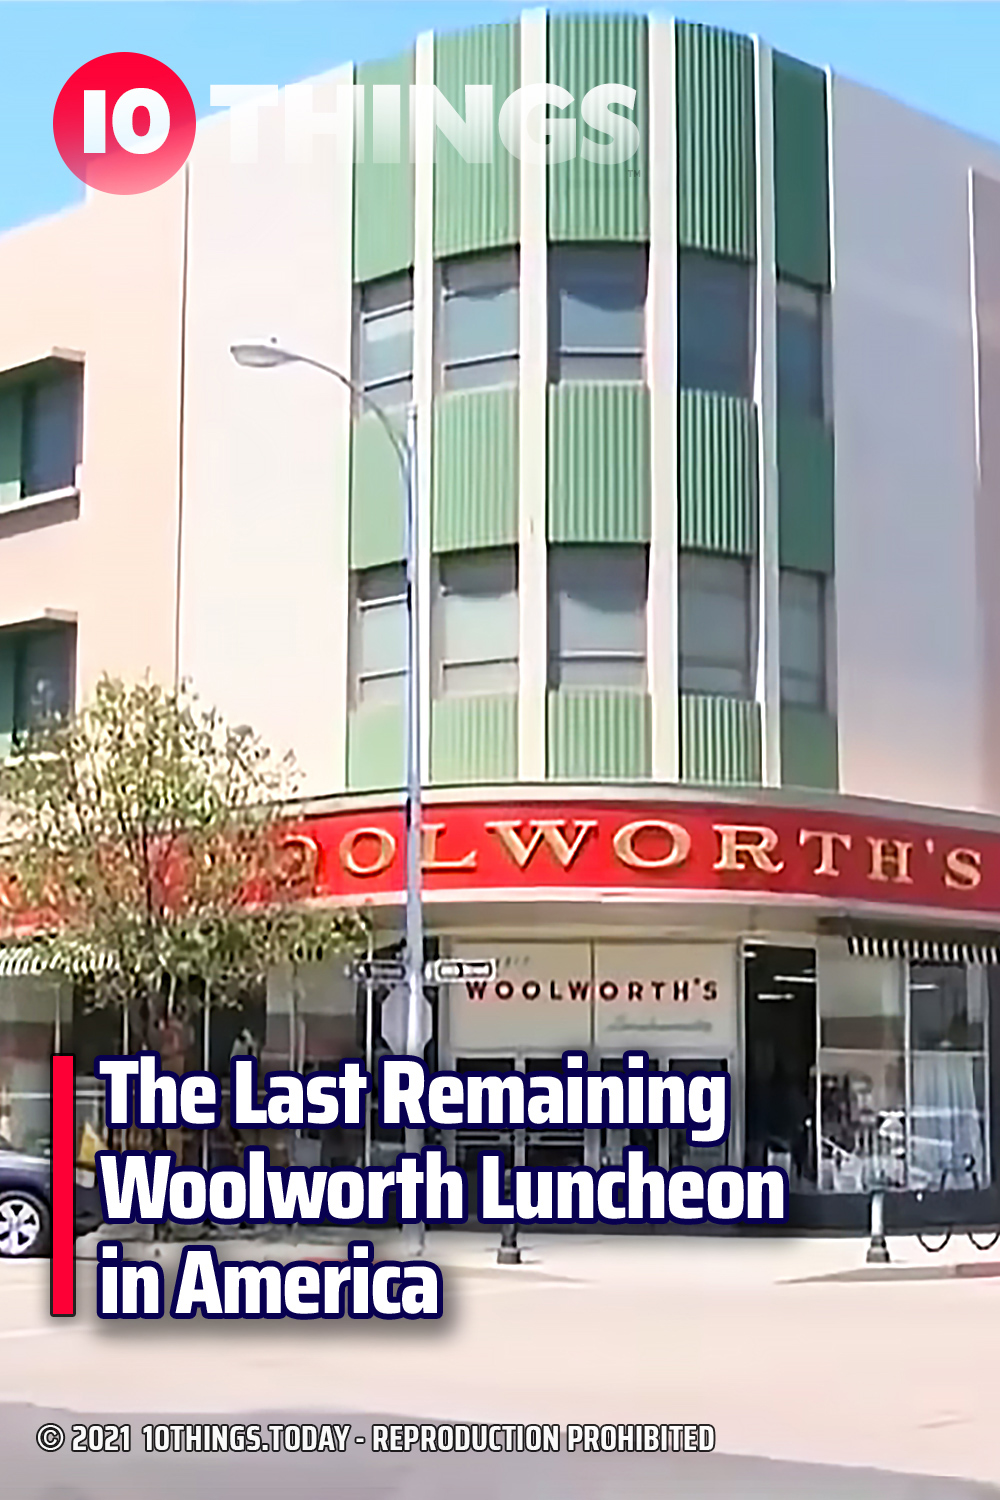 The Last Remaining Woolworth Luncheon in America